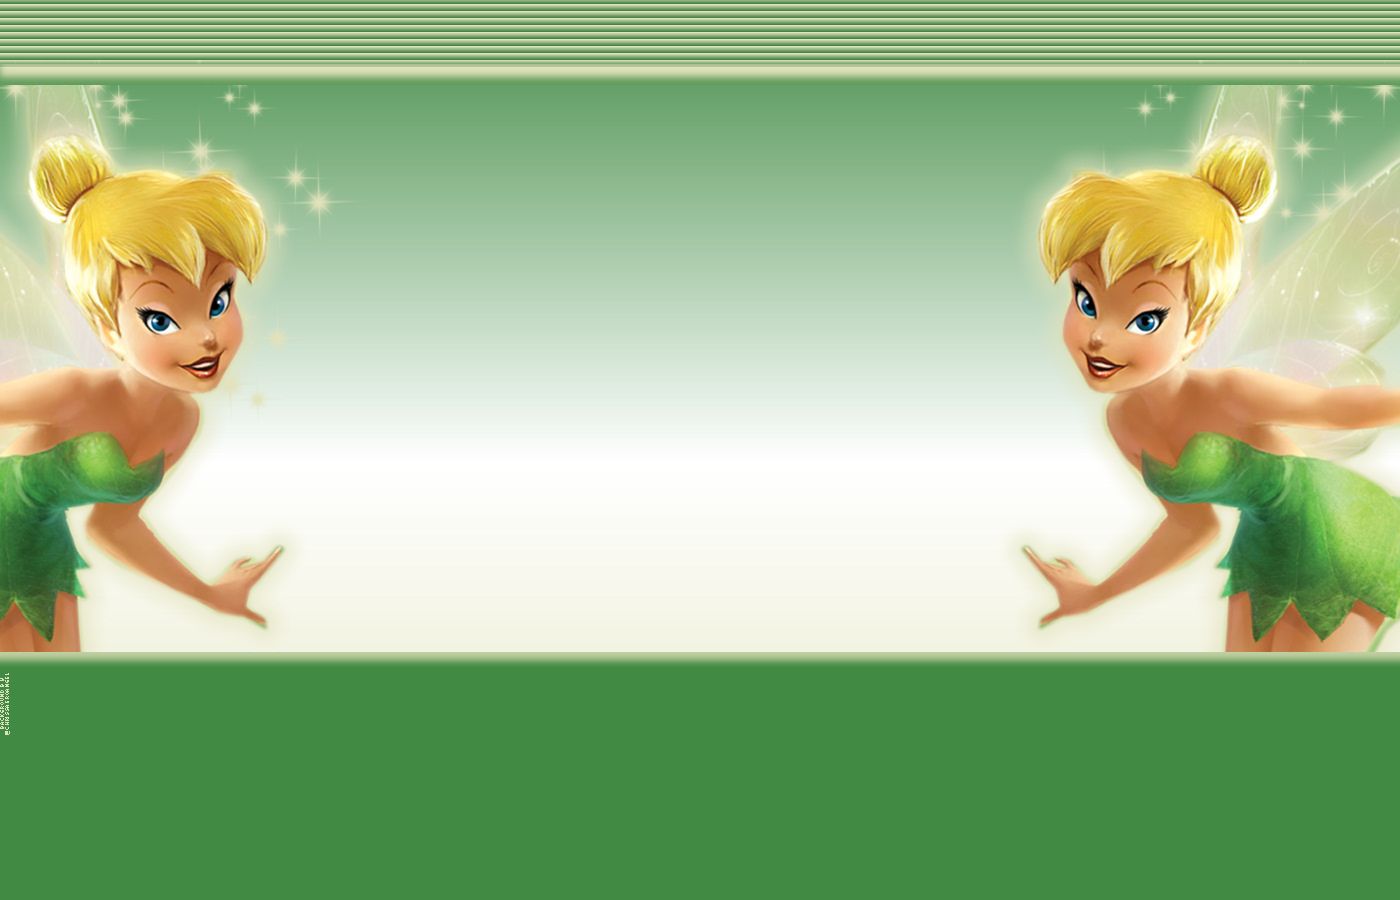 Download Free Tinkerbell Wallpaper 1400x900 Full HD Backgrounds